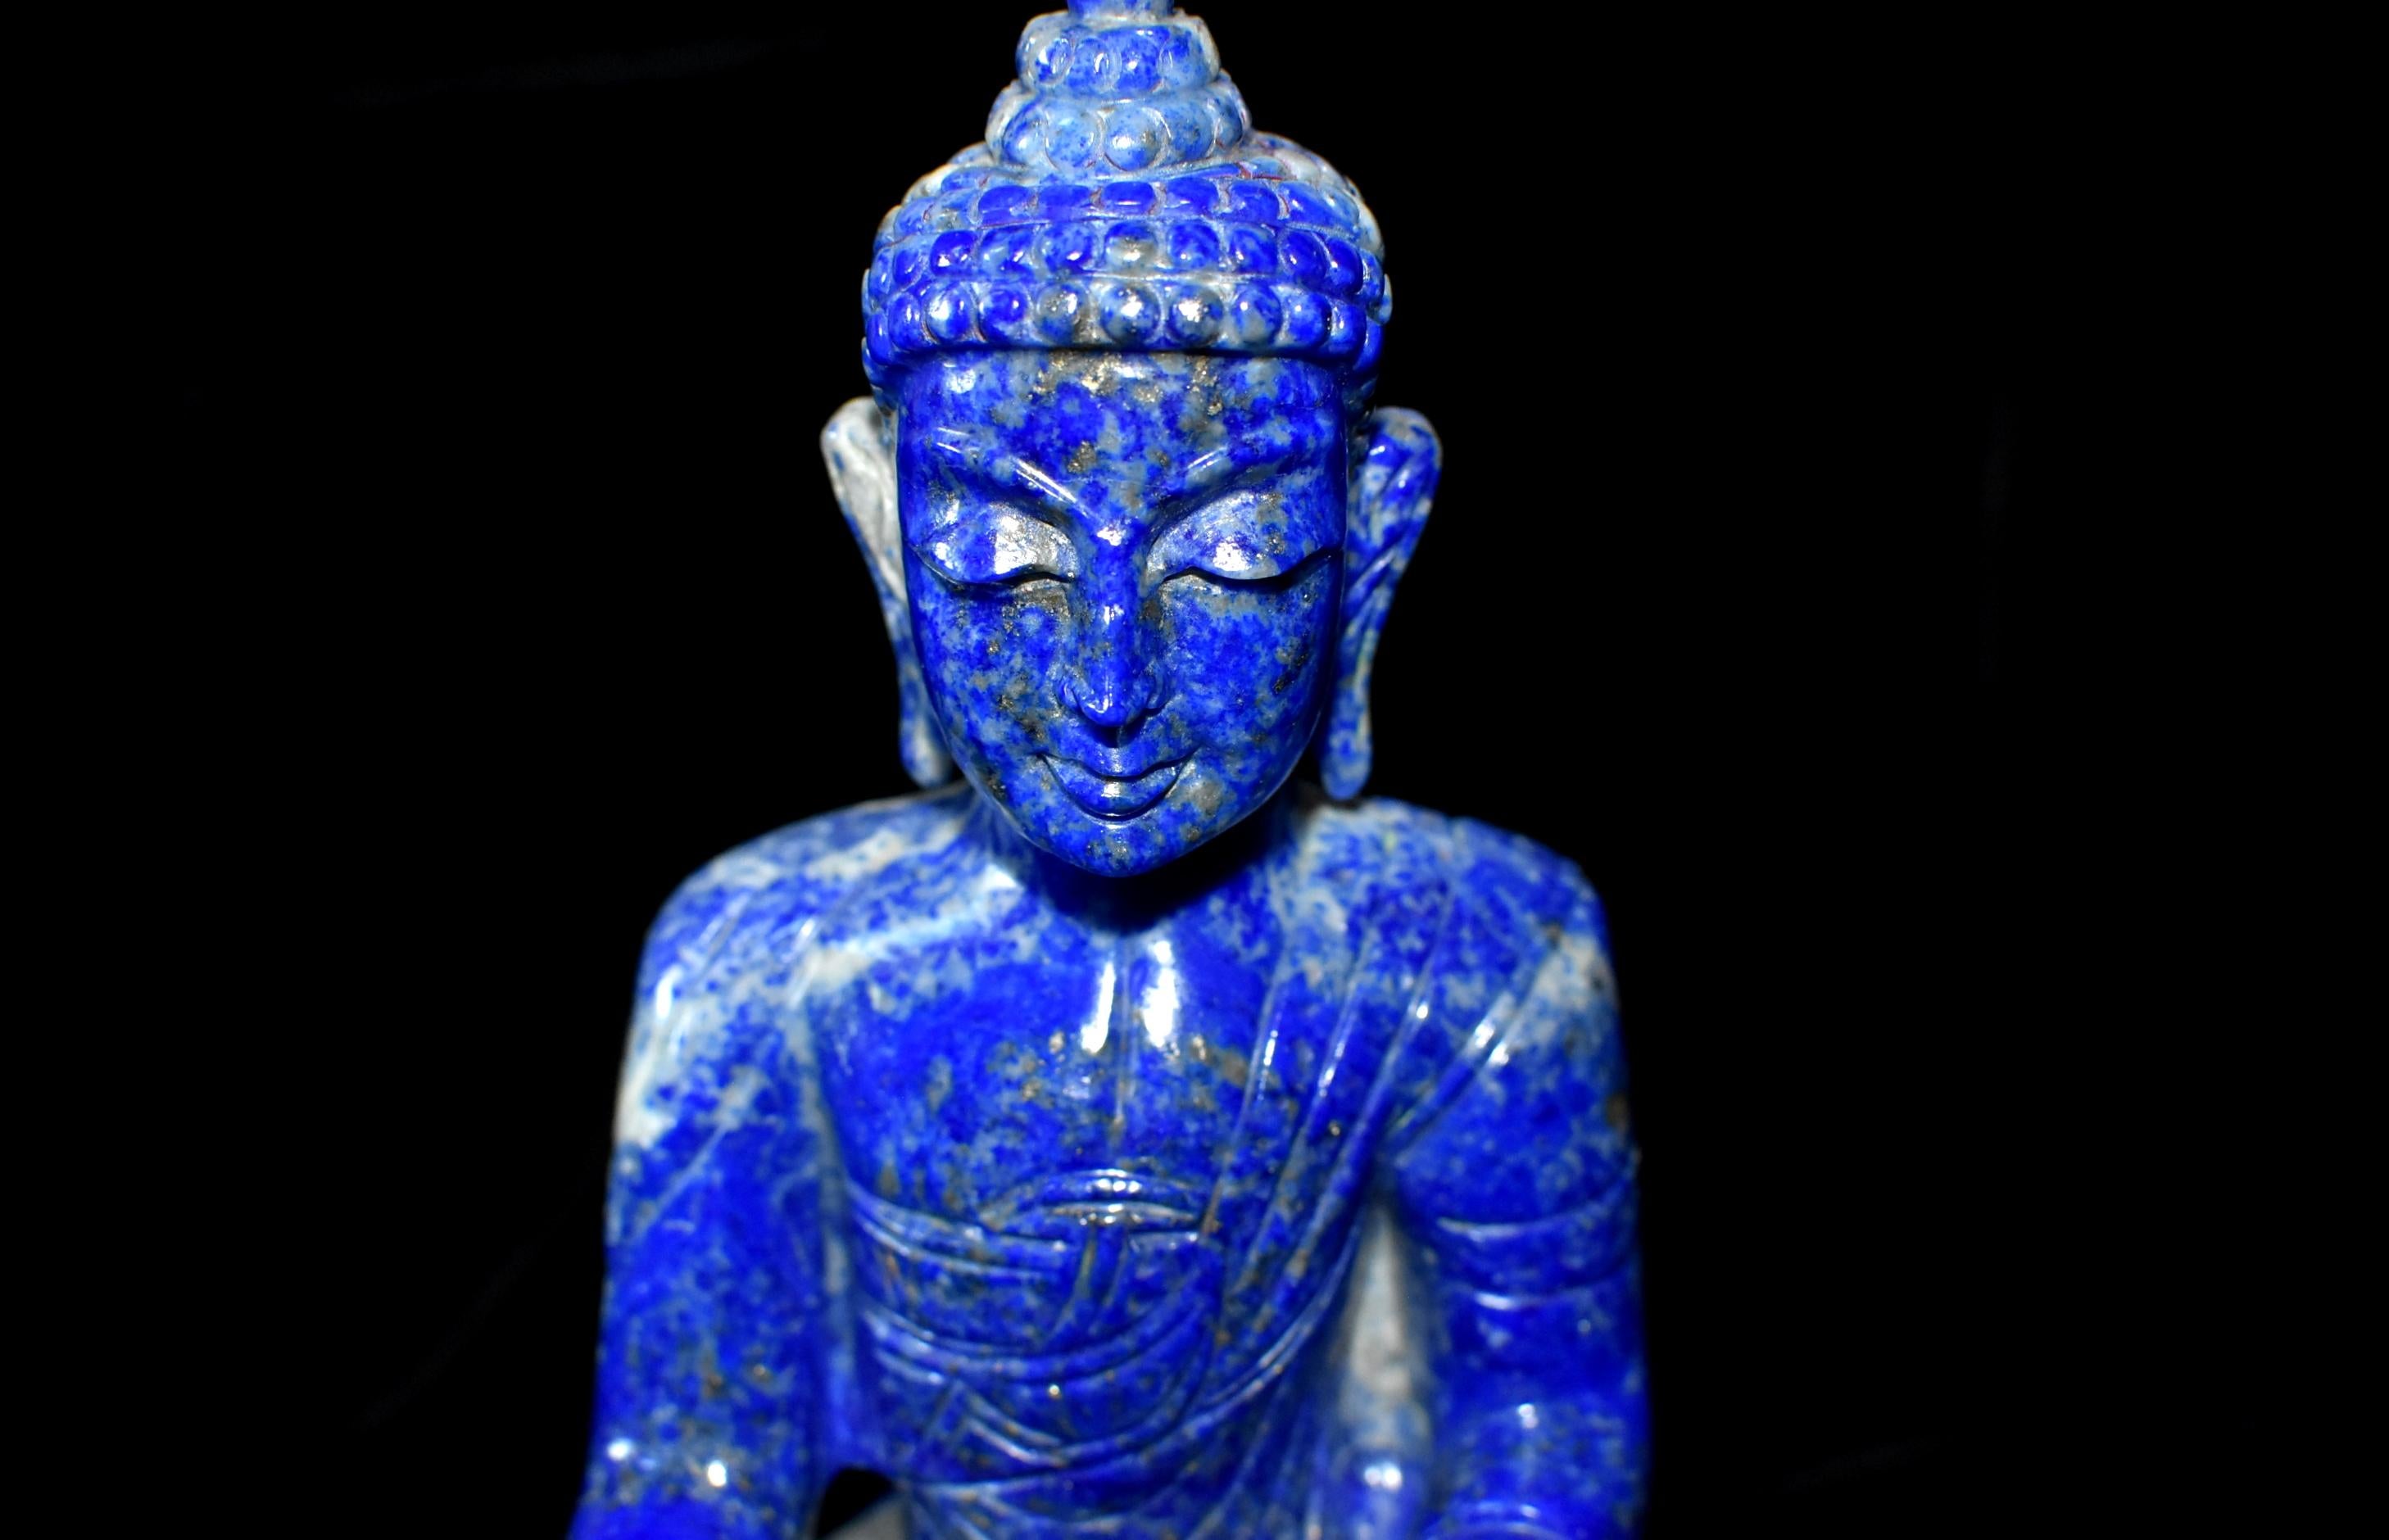 Beautiful, 1st grade, Fine, all natural lapis stone statue of Buddha, carved by a master stone carver. The color of the lapis is a saturated, bright cobalt blue with natural stripes of white and gold. The featured Buddha is an Indian style